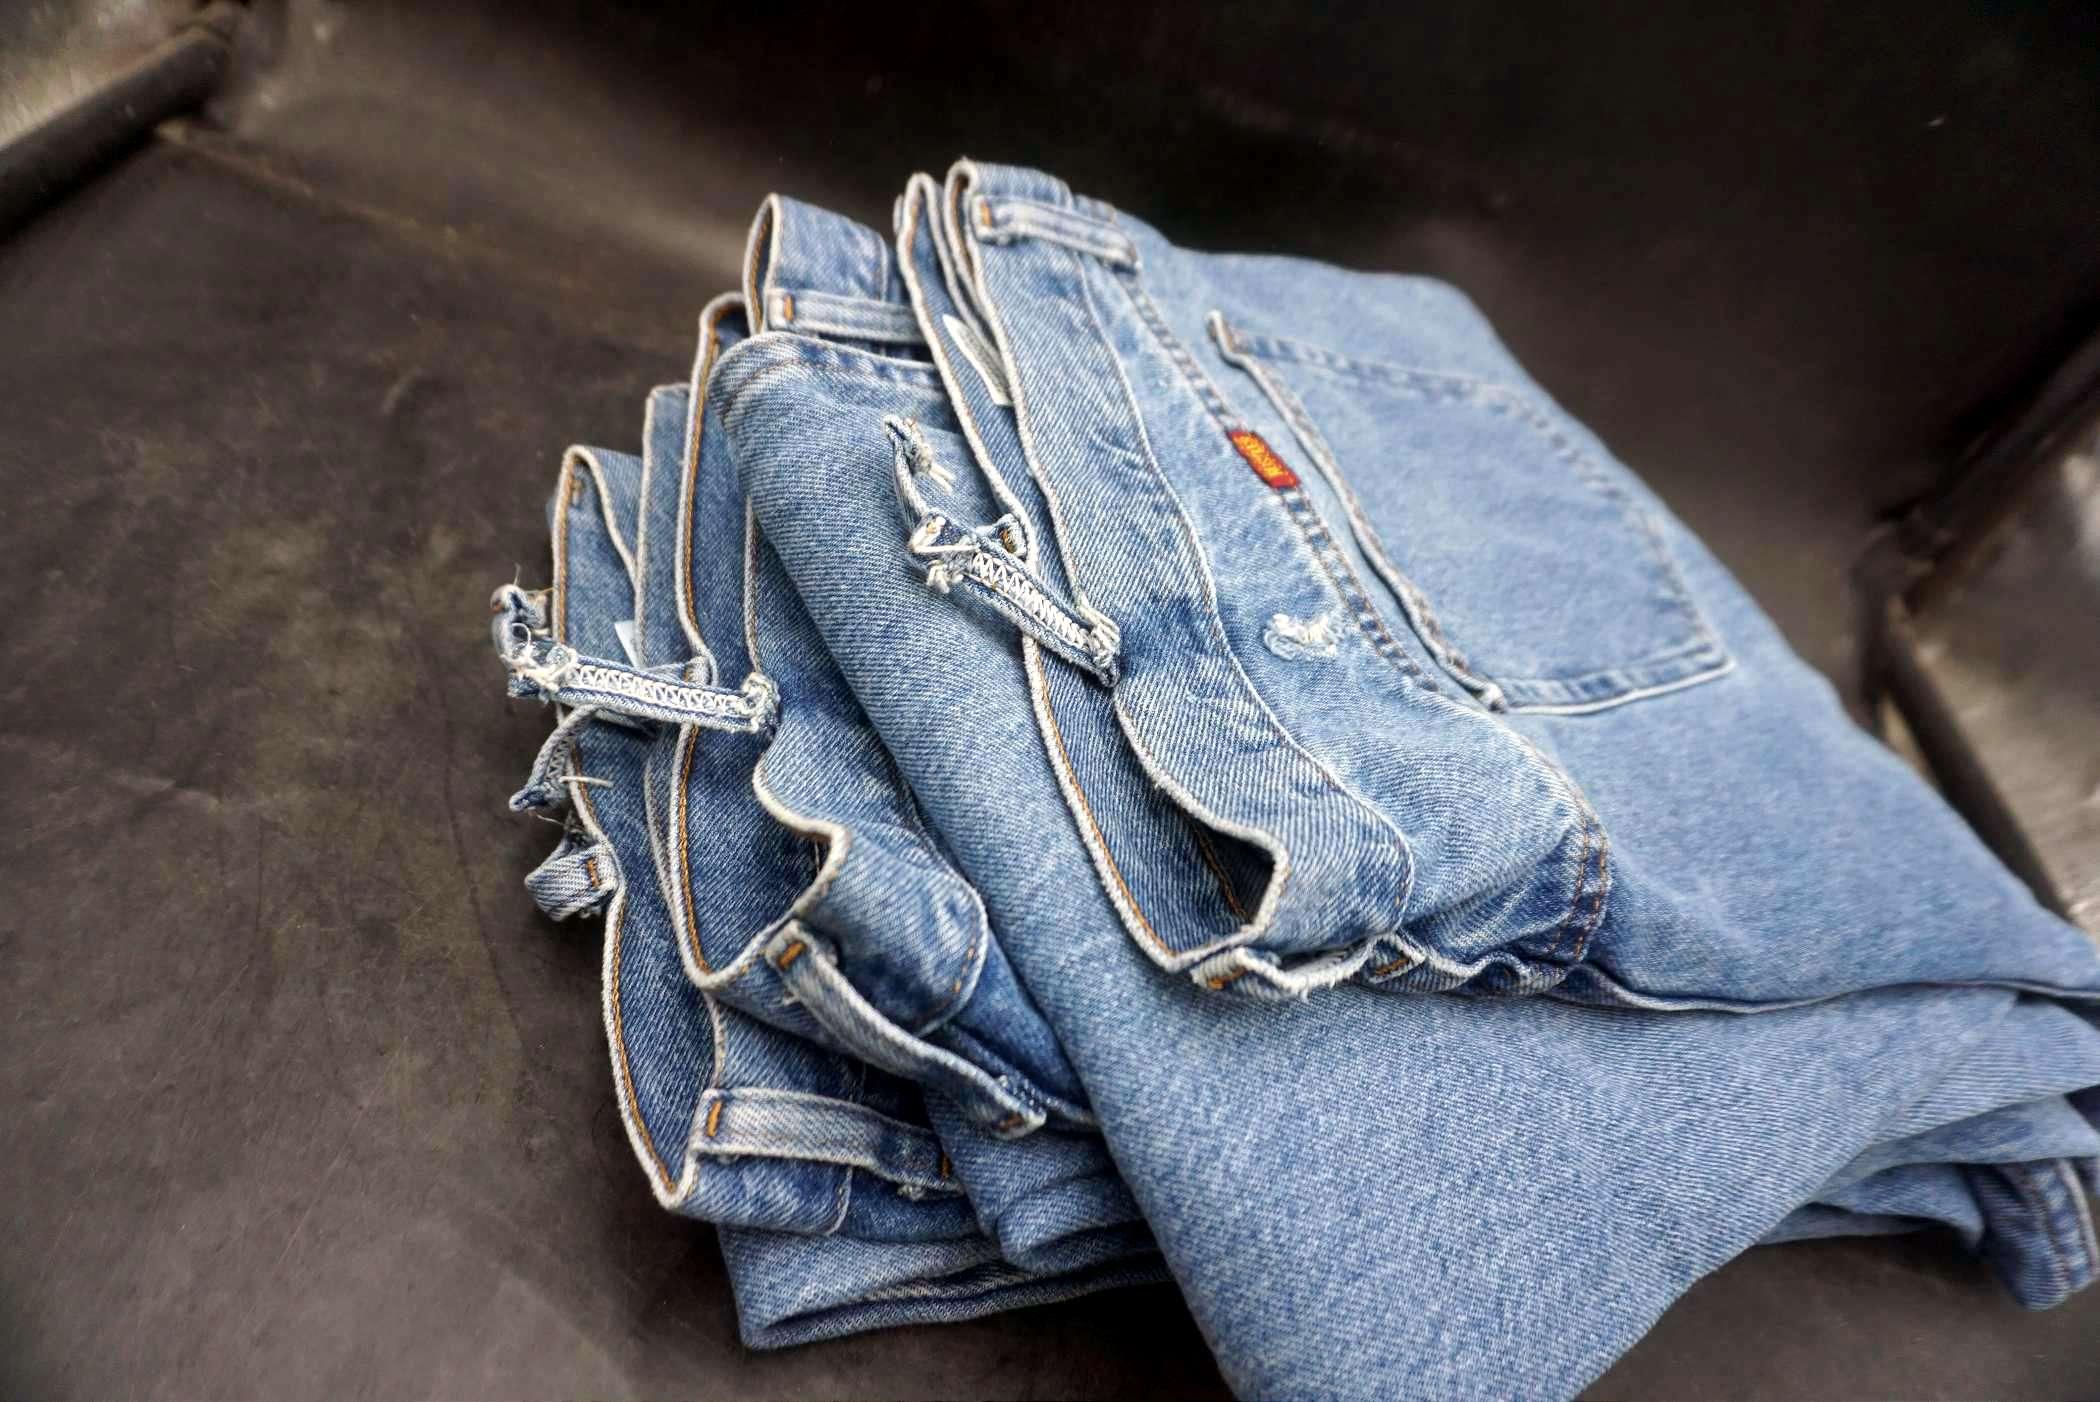 3 - Pairs Of Jeans (44X30)